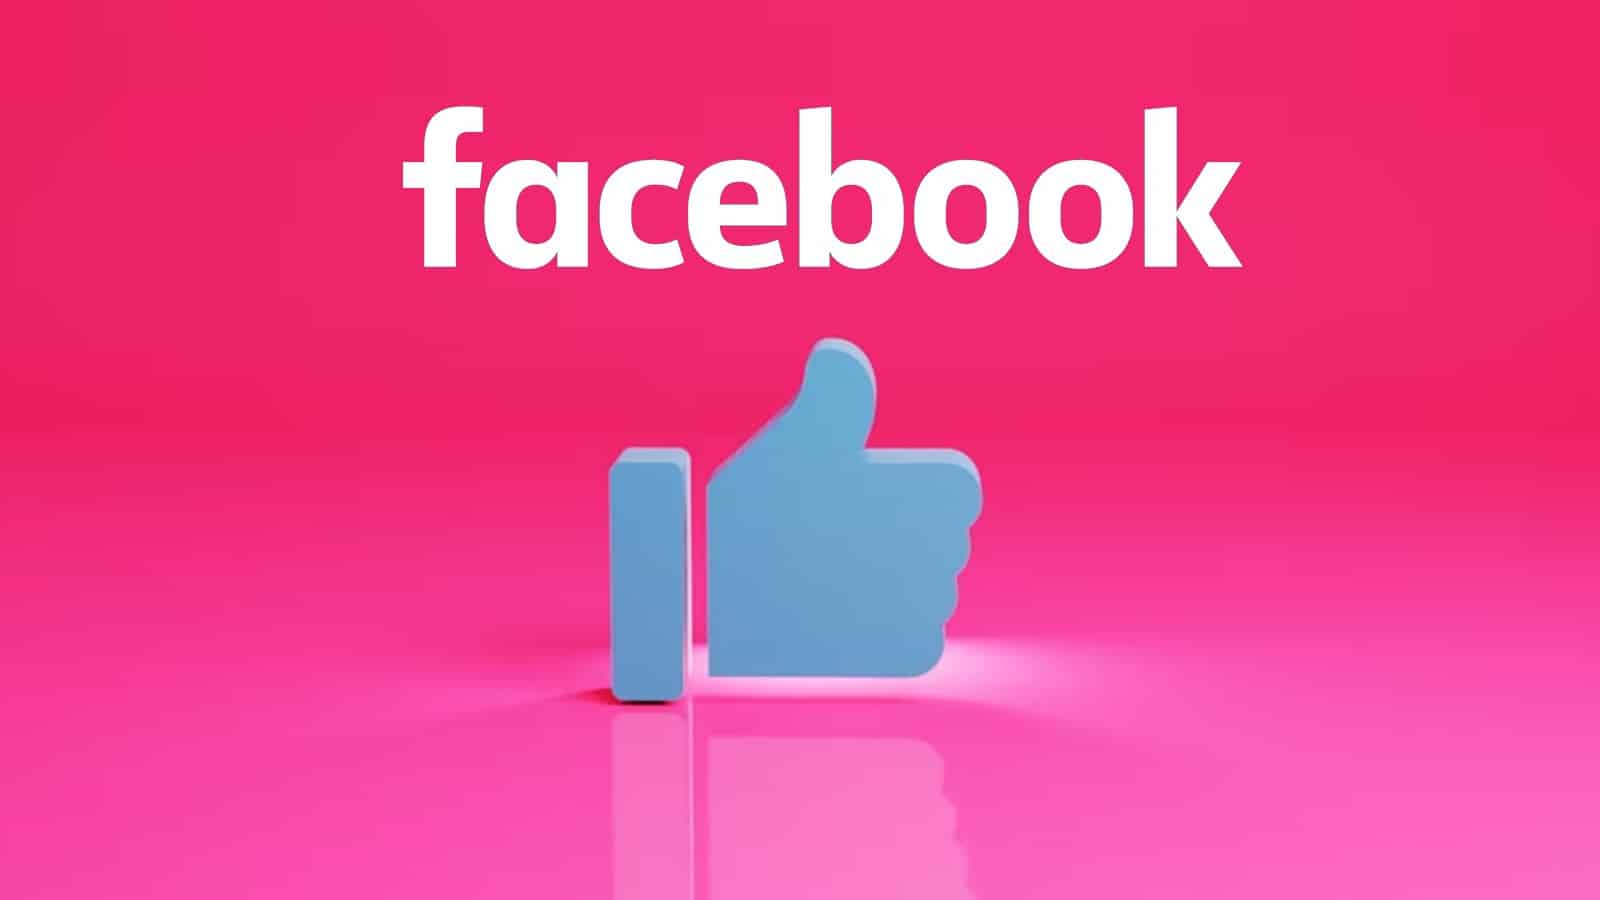 Facebook Like icon with logo and pink background